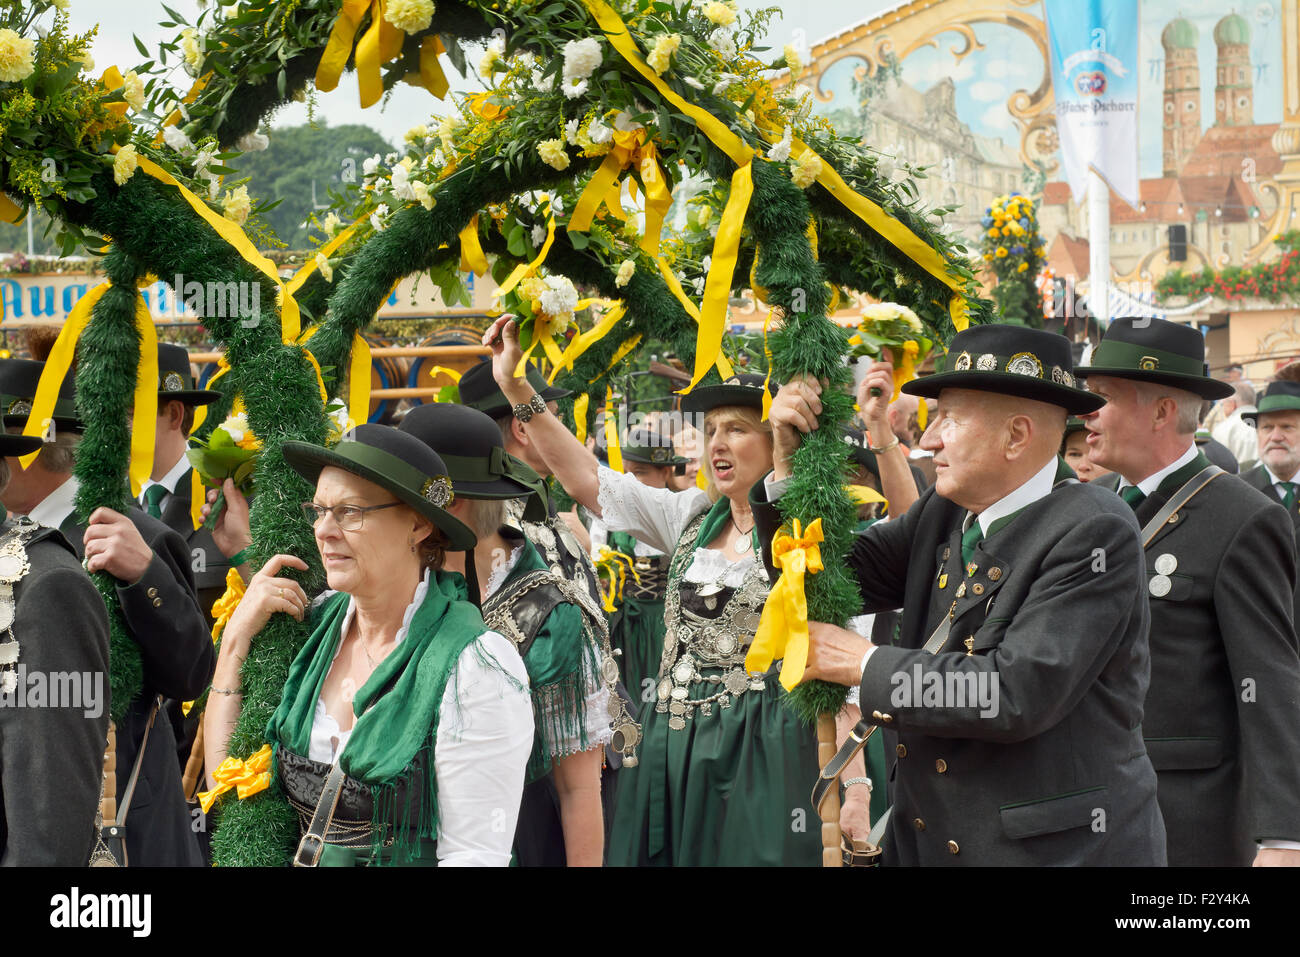 MUNICH, GERMANY – SEPT. 20, 2015: Traditional Marching Group with Local Costumes entertain Crowds of visitors at the annual Oktoberfest. The Festival runs from September 19th until October 4th 2015 in Munich, Germany. Stock Photo